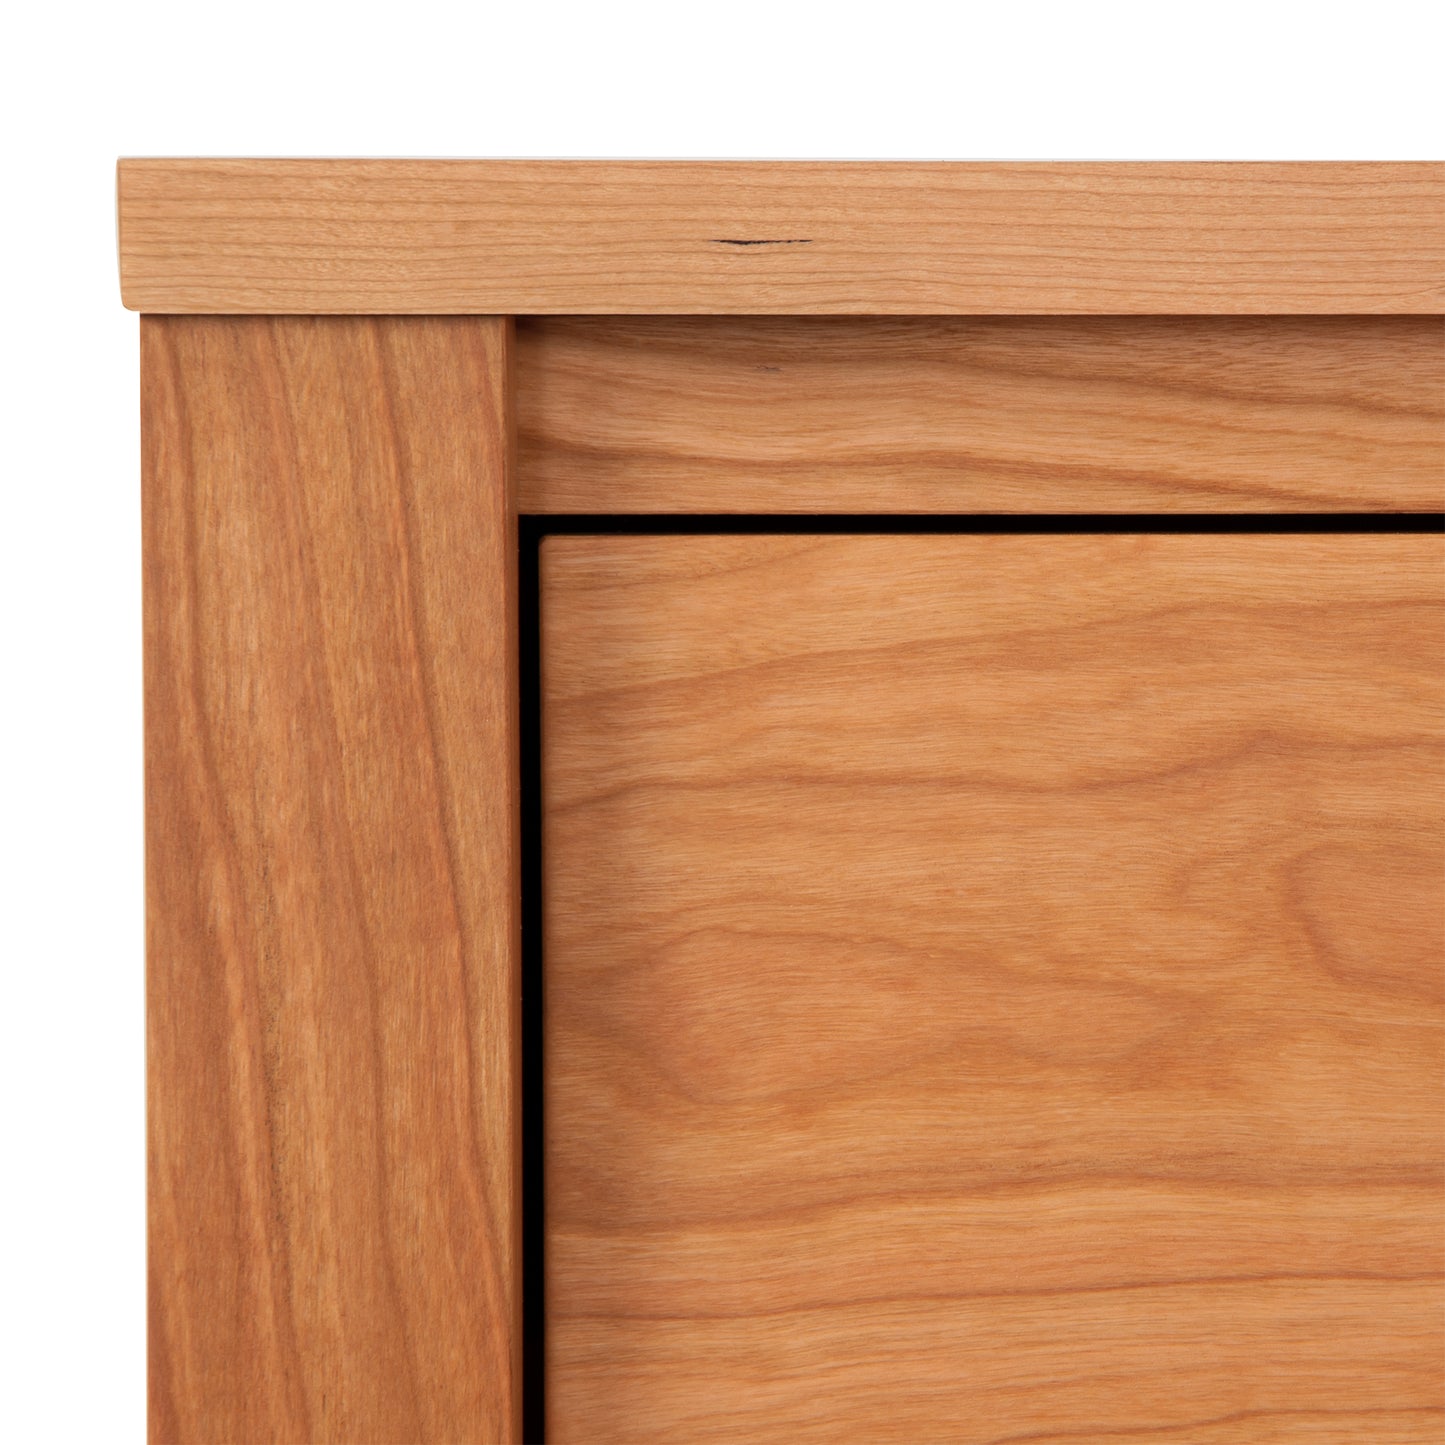 Close-up view of a Maple Corner Woodworks Andover Modern 1-Drawer Nightstand with Door, highlighting the wood grain and joints, emphasising the craftsmanship of Vermont woodworkers.